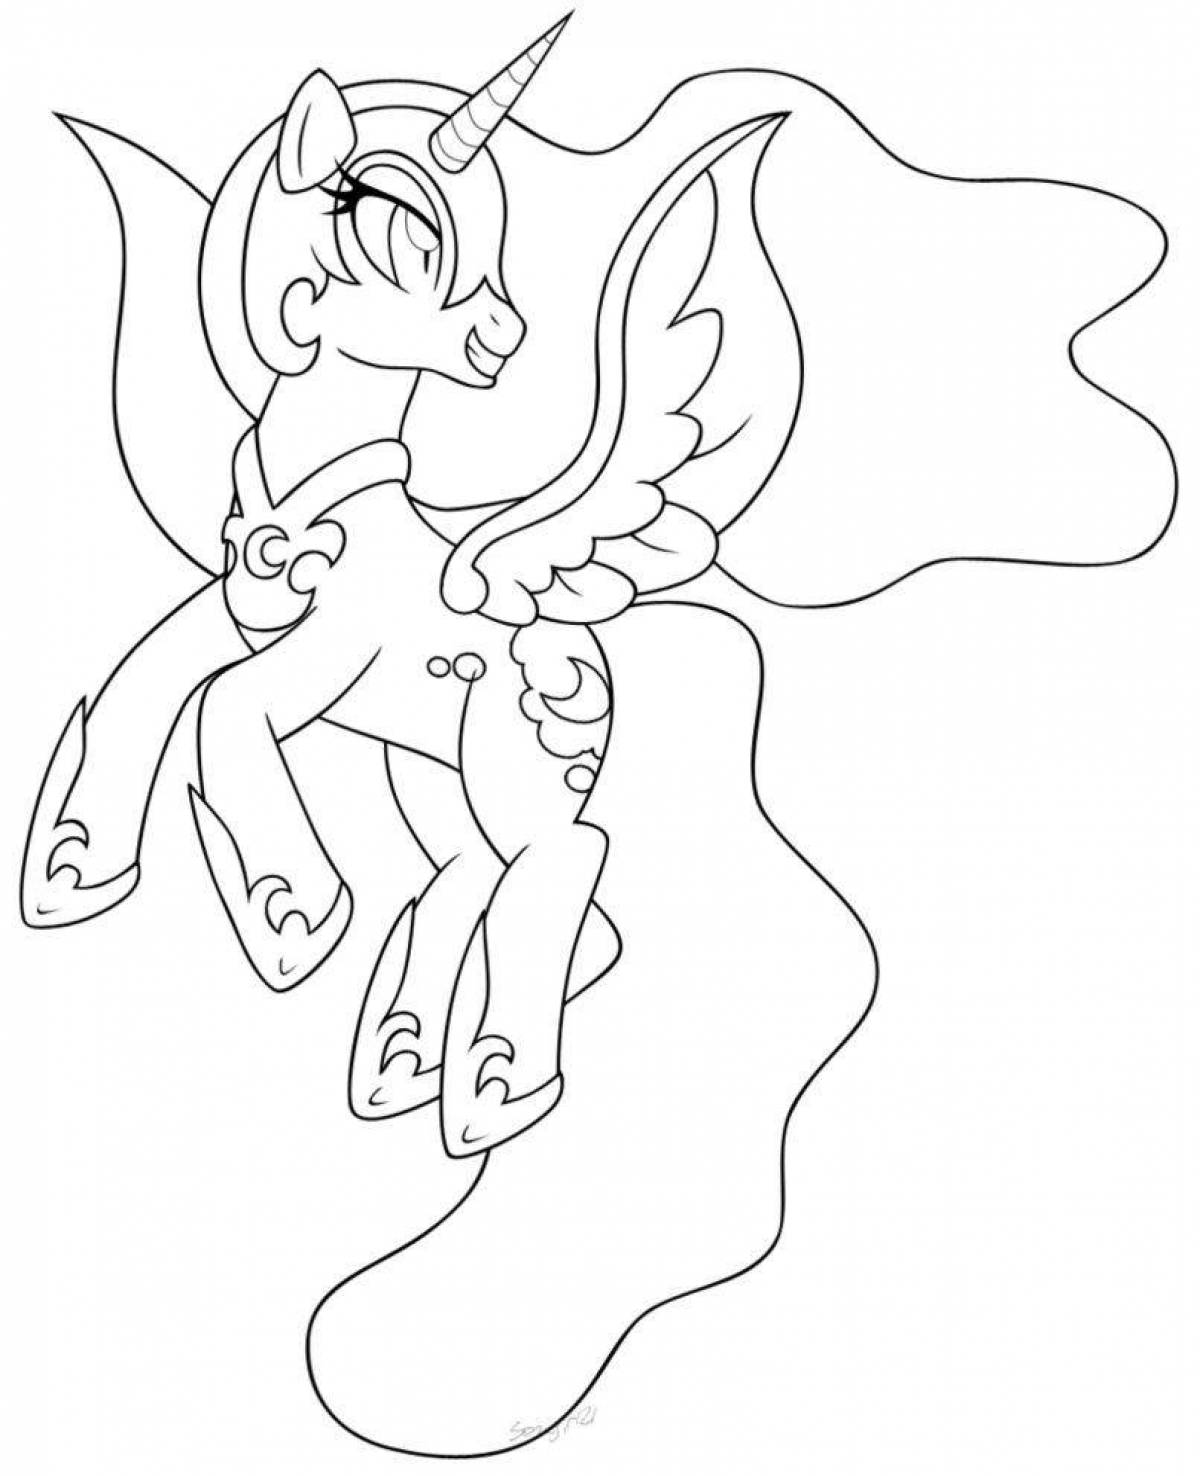 Sparkly nightmare moon coloring page